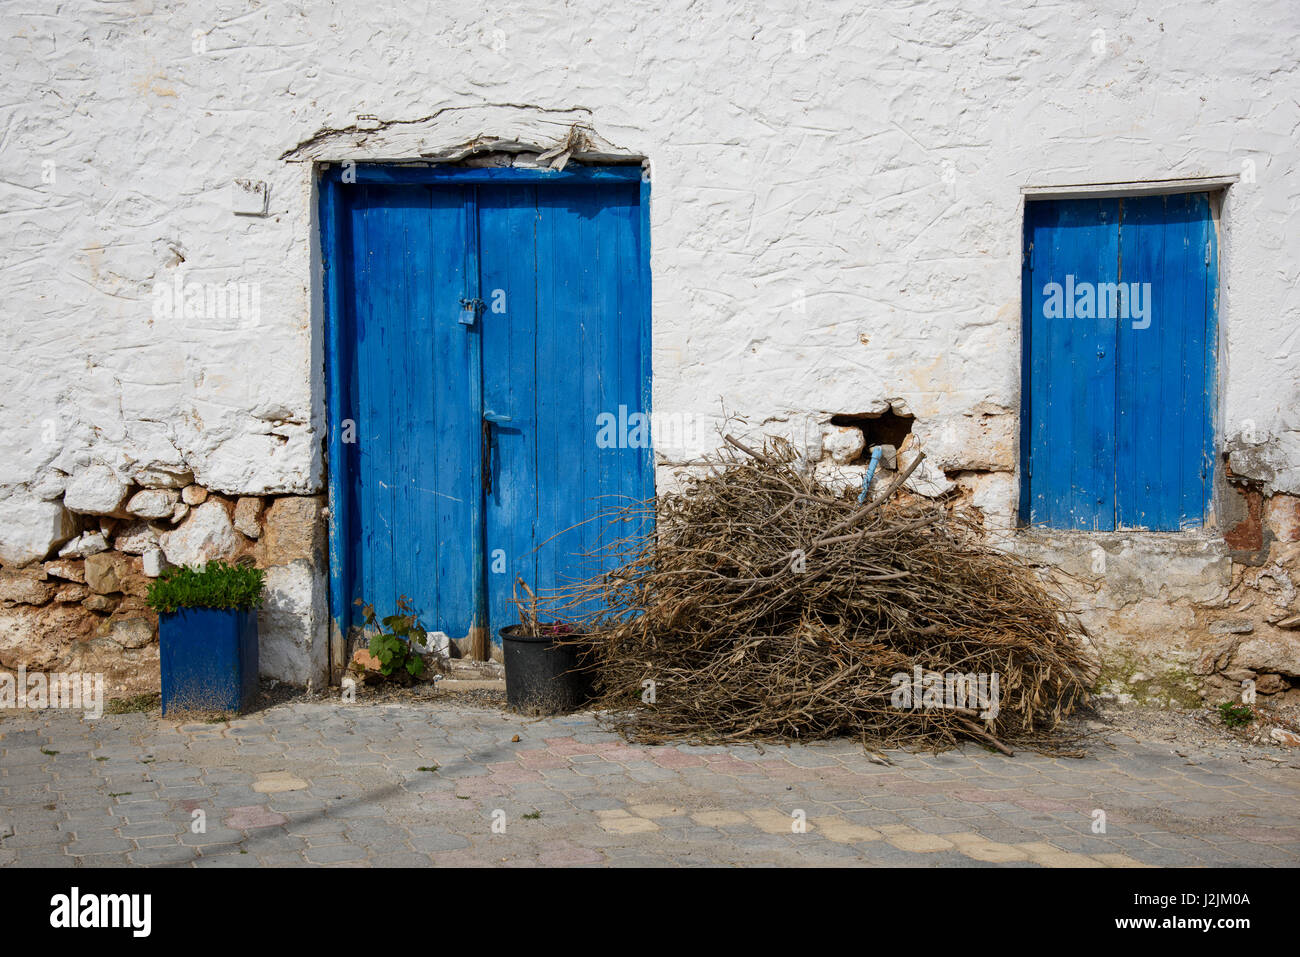 A bundle of sticks outside a traditional house in the Greek village of Analipsi, Crete, Greece. Stock Photo